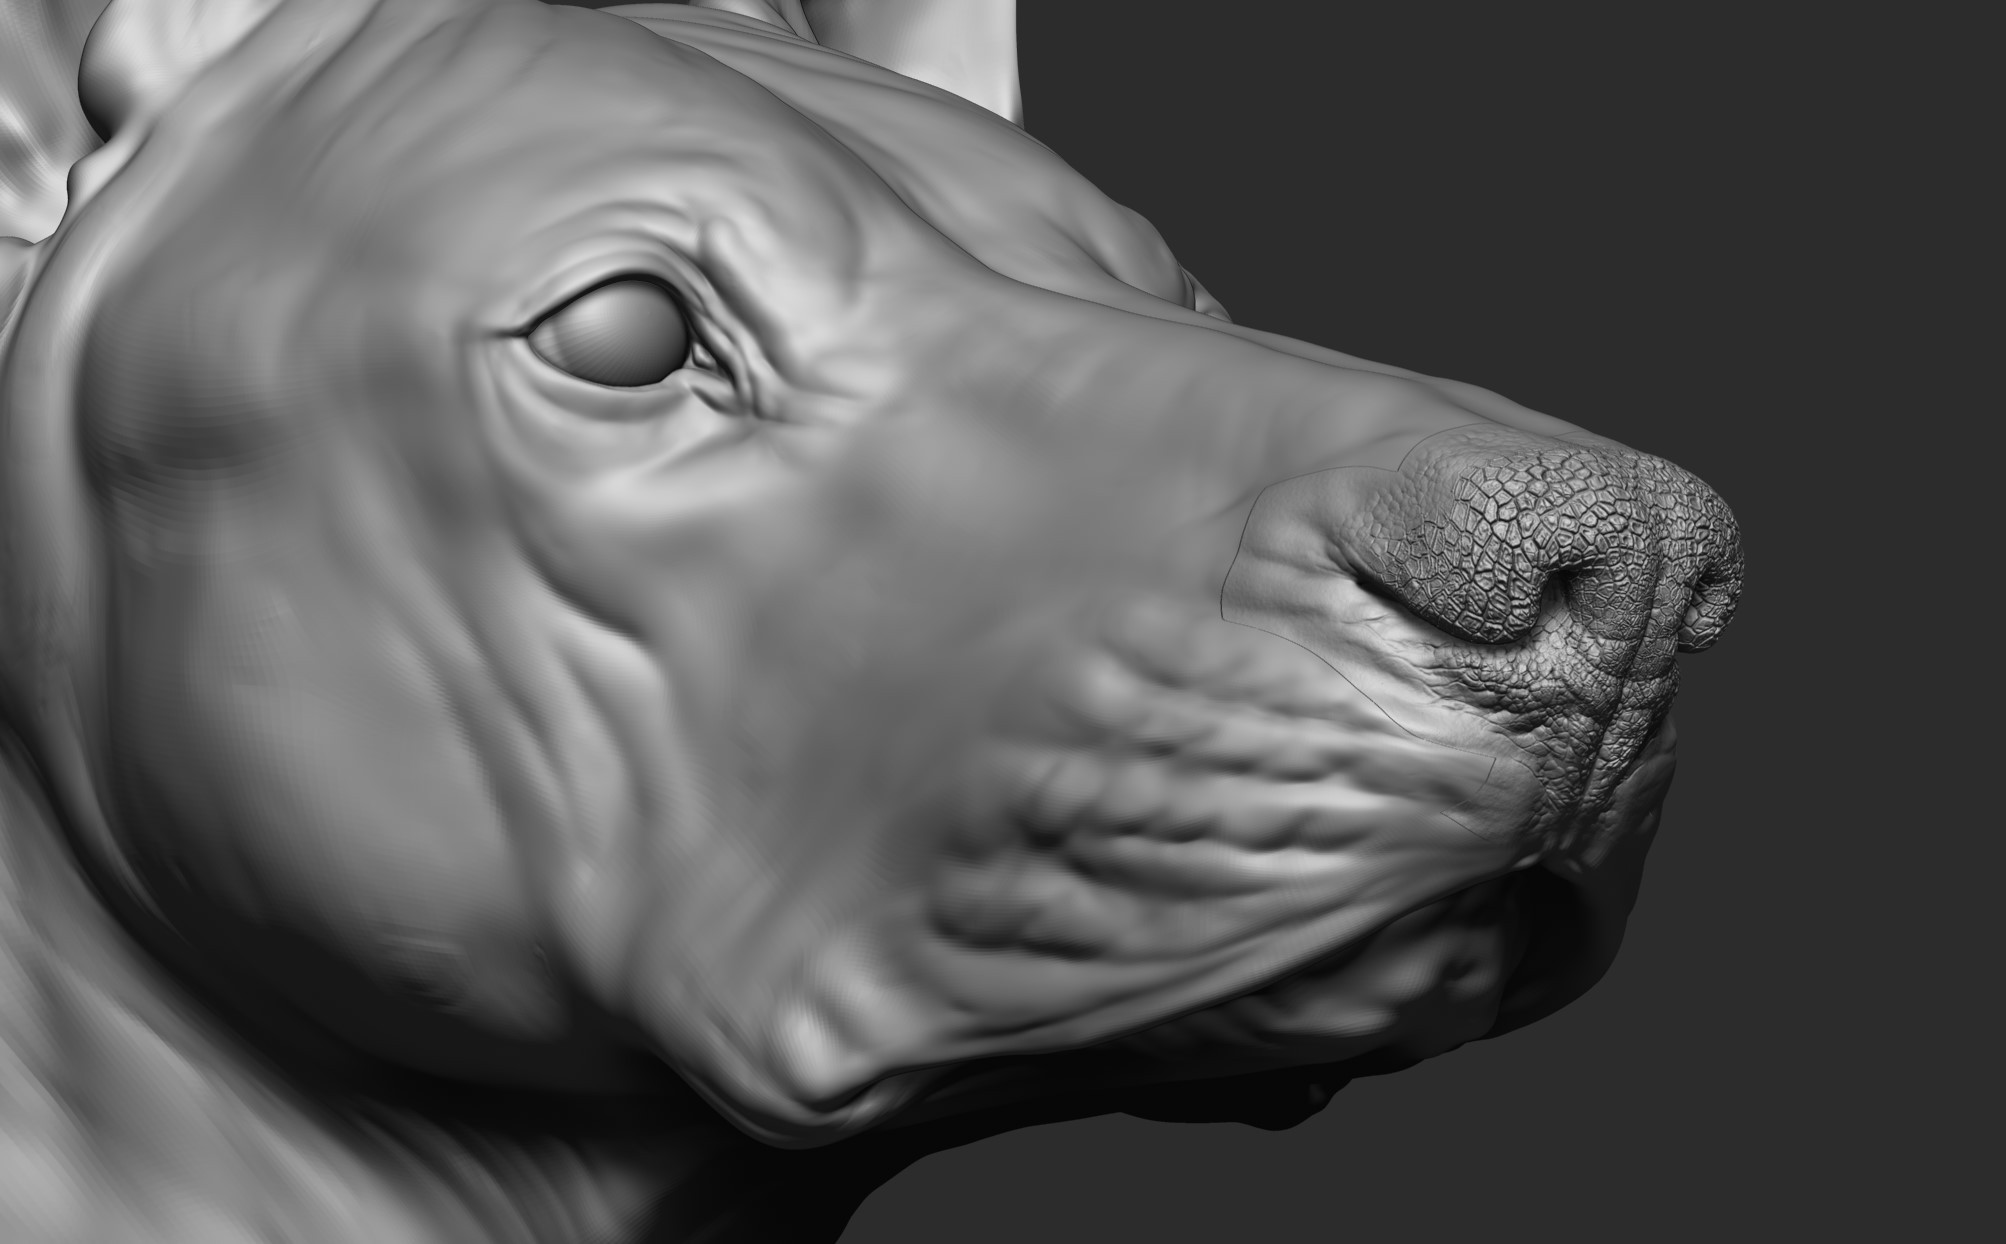 Model - nose close up and detailed sculpt